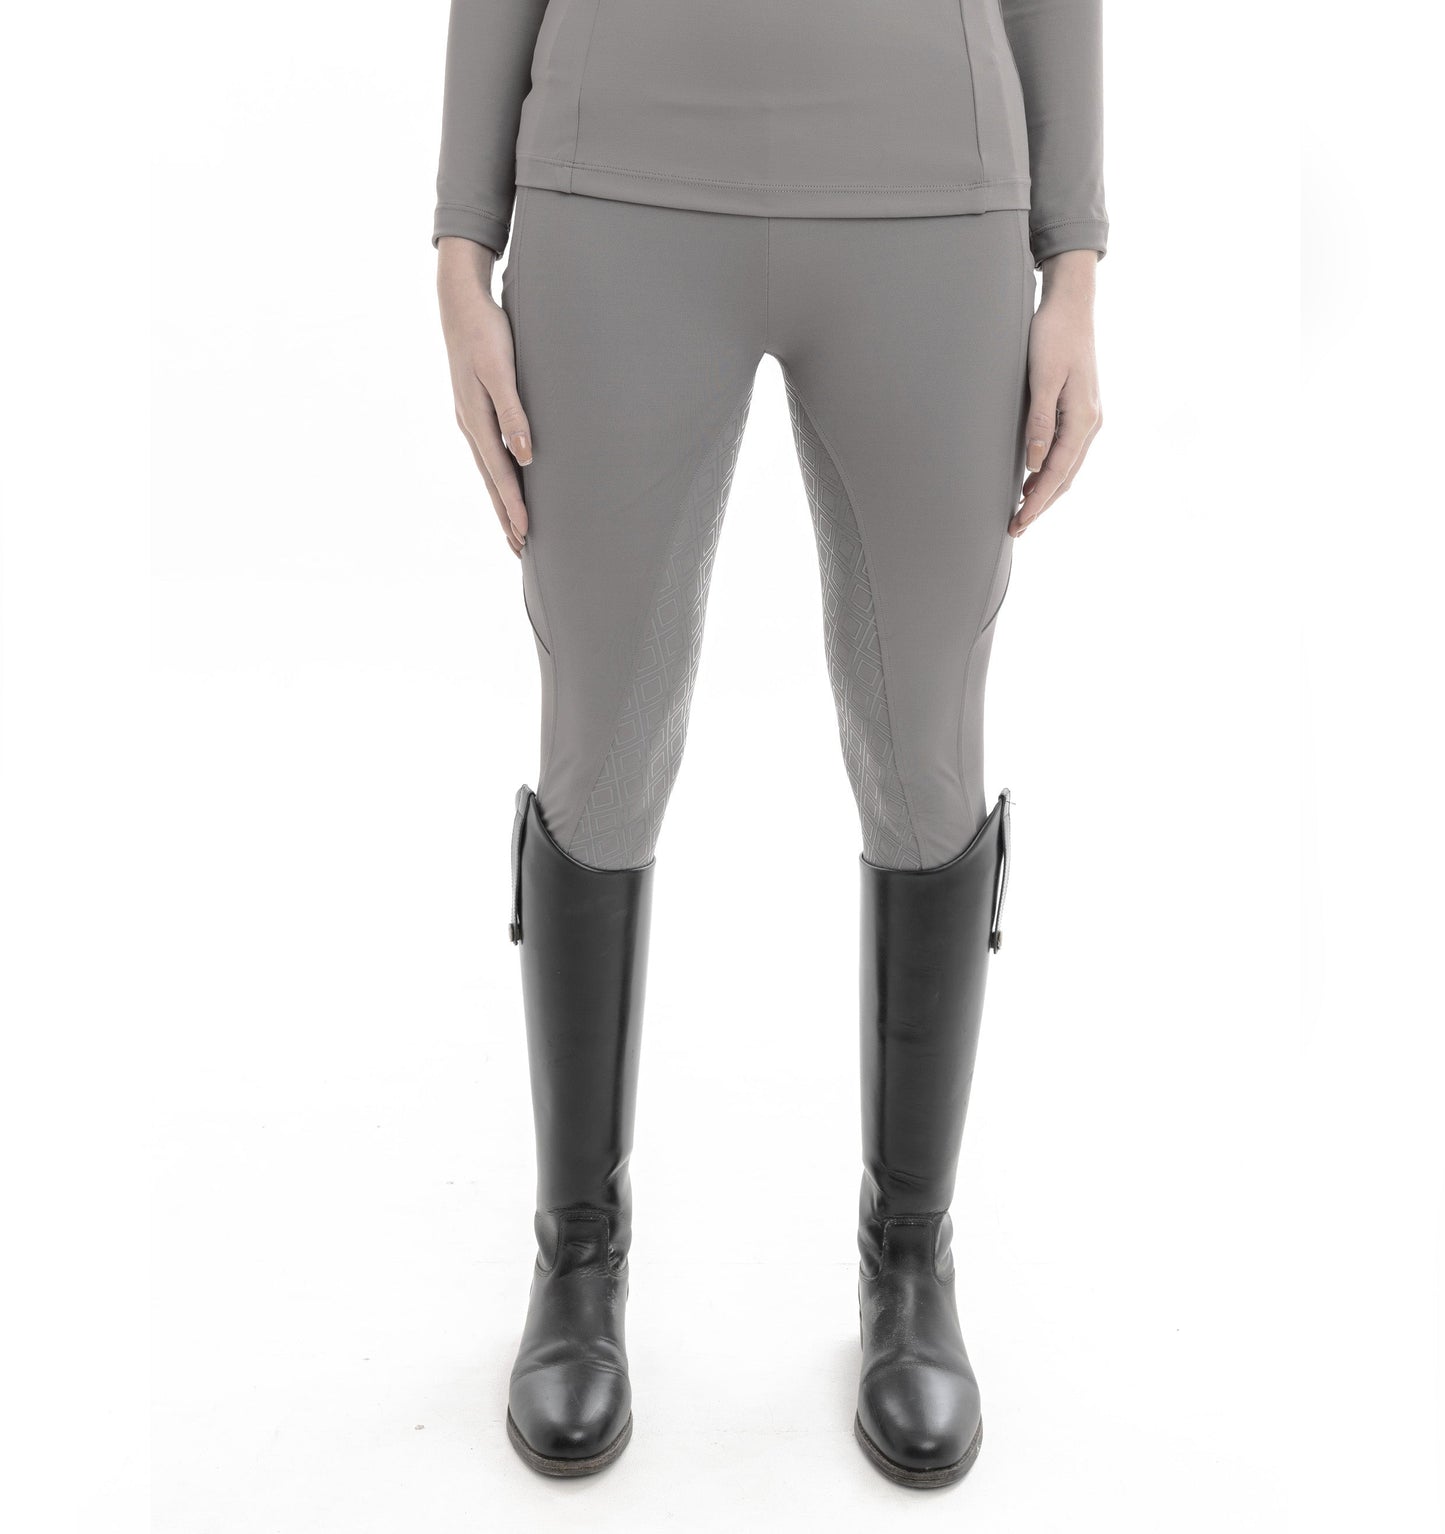 Shop Riding Leggings at CT Equine Collection